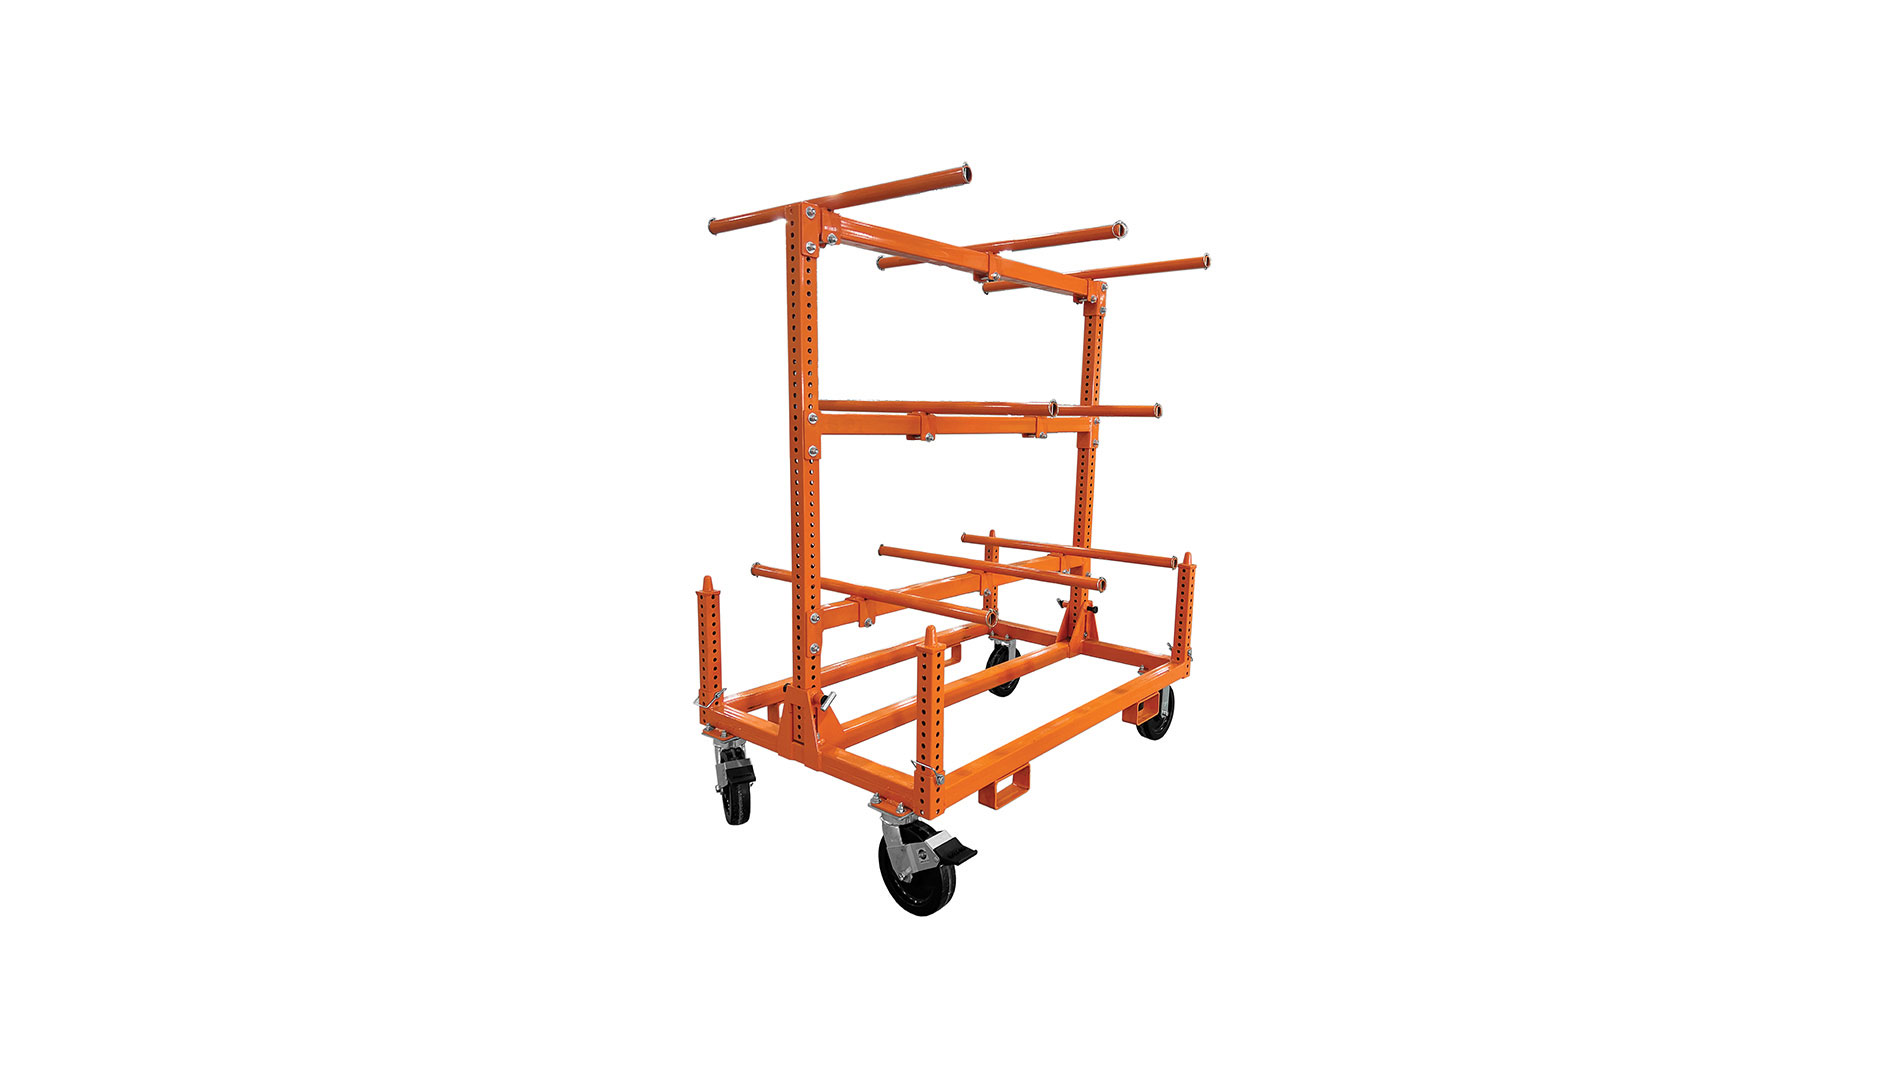 Orange wire cart. Image by iTOOLco.